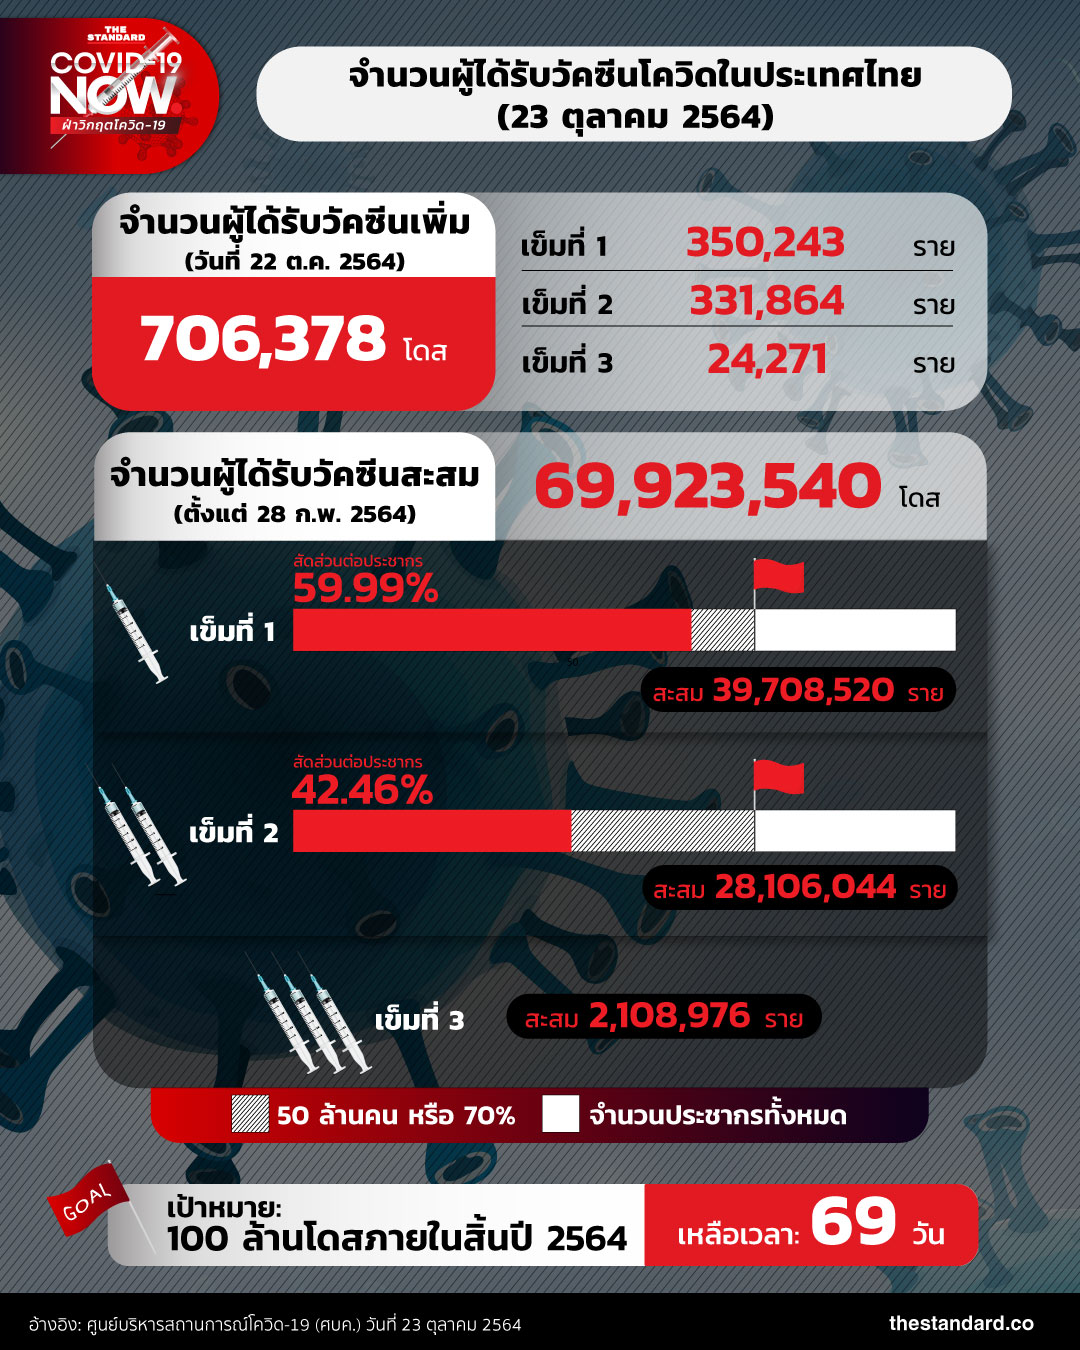 number-of-people-got-covid-19-vaccines-in-thailand 231064